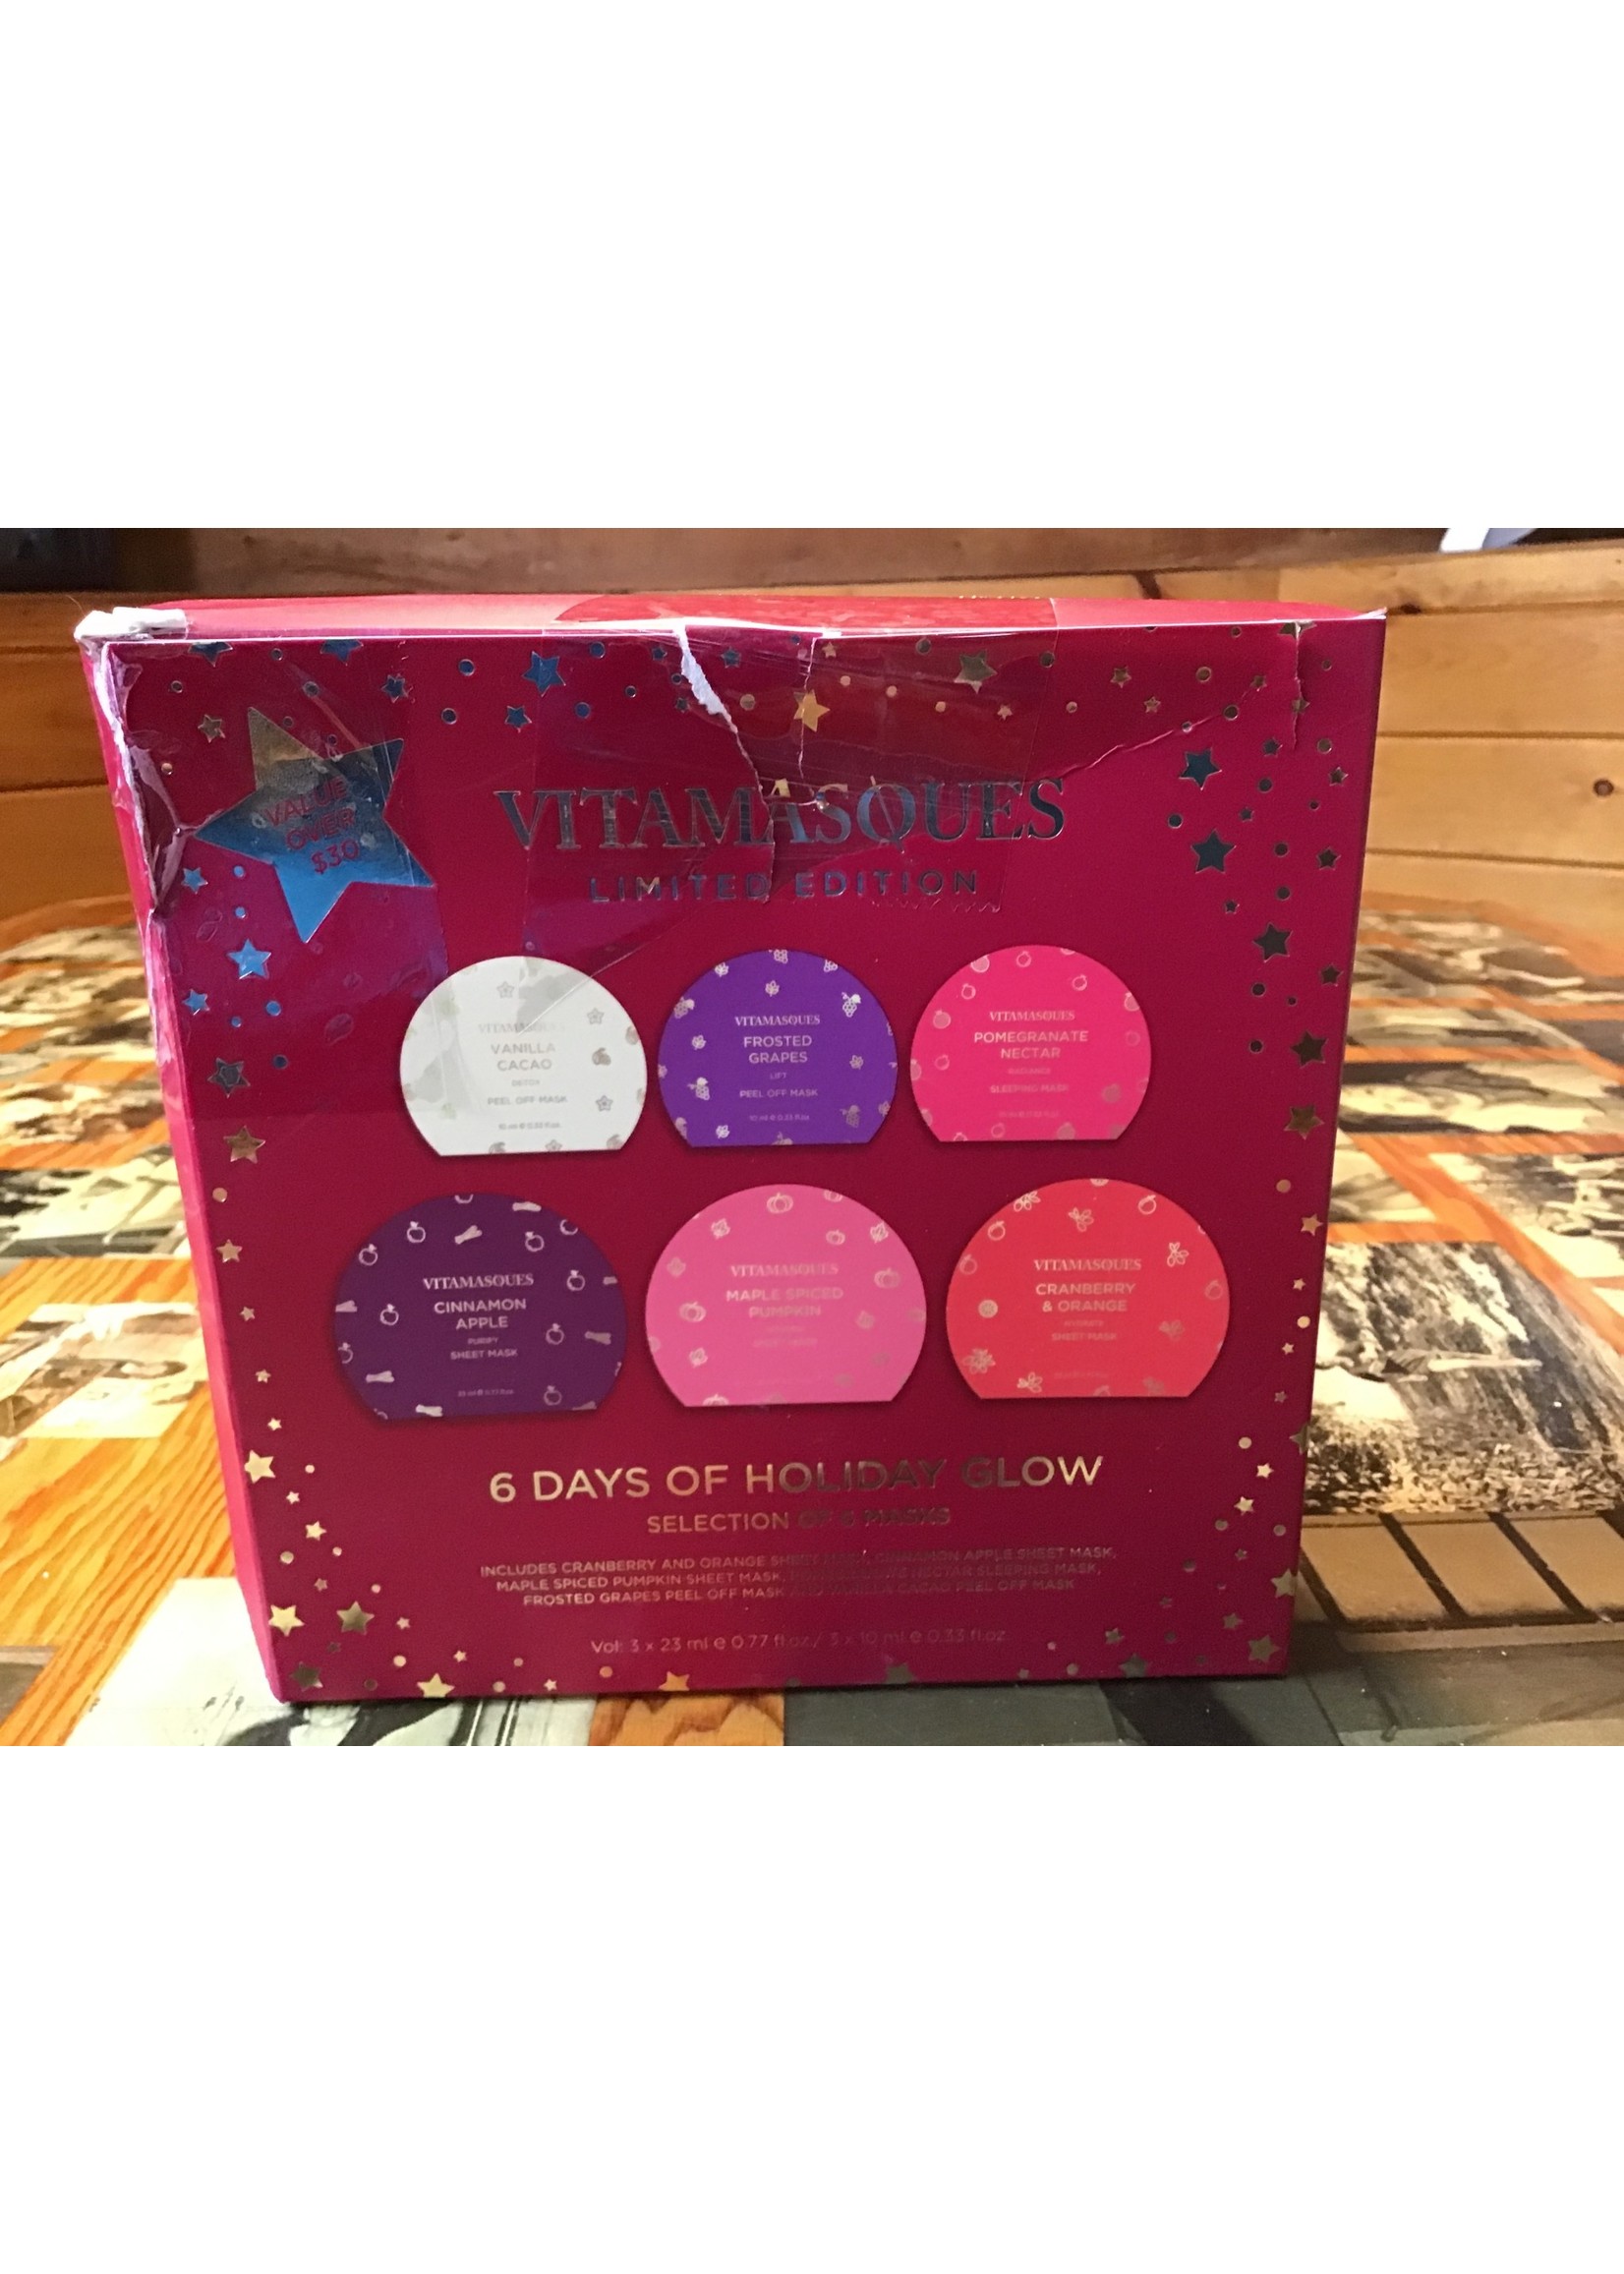 *damaged package* Vitamasques Festive Face Mask Gift Set - Limited Edition - 6ct